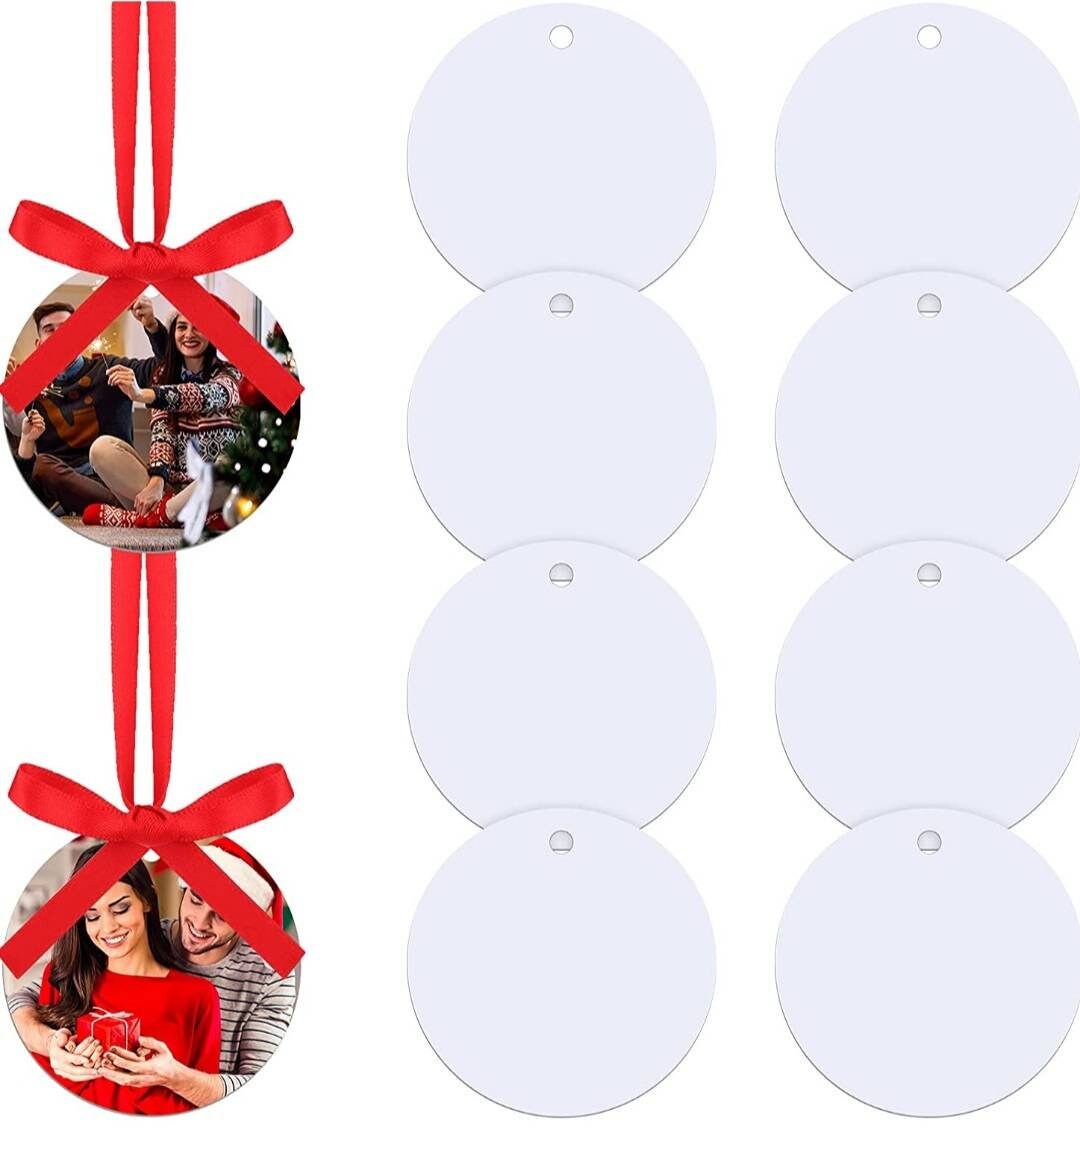 Ten Double Sided 3 Inch Sublimation Christmas Ornament Custom Gift Tag DIY  Blanks for Personalized Gifts Ships Free SAME Day 